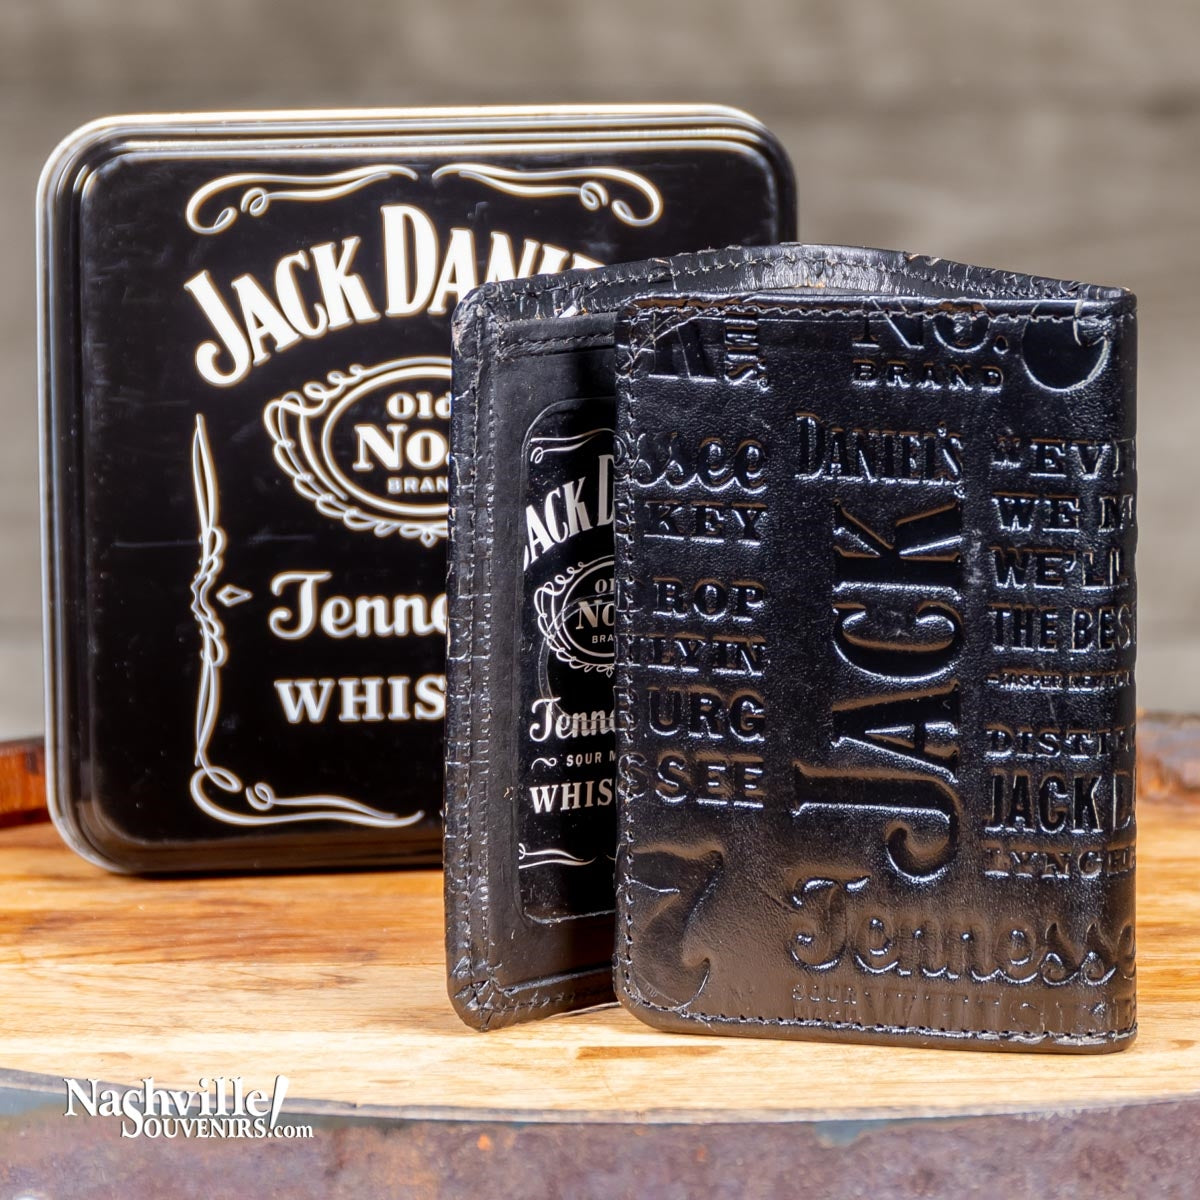 Jack Daniel's Lynchburg Lore Wallet. Get one today with FREE SHIPPING on all US orders over $75! One of for most popular designs featuring multiple Jack Daniel's logos.